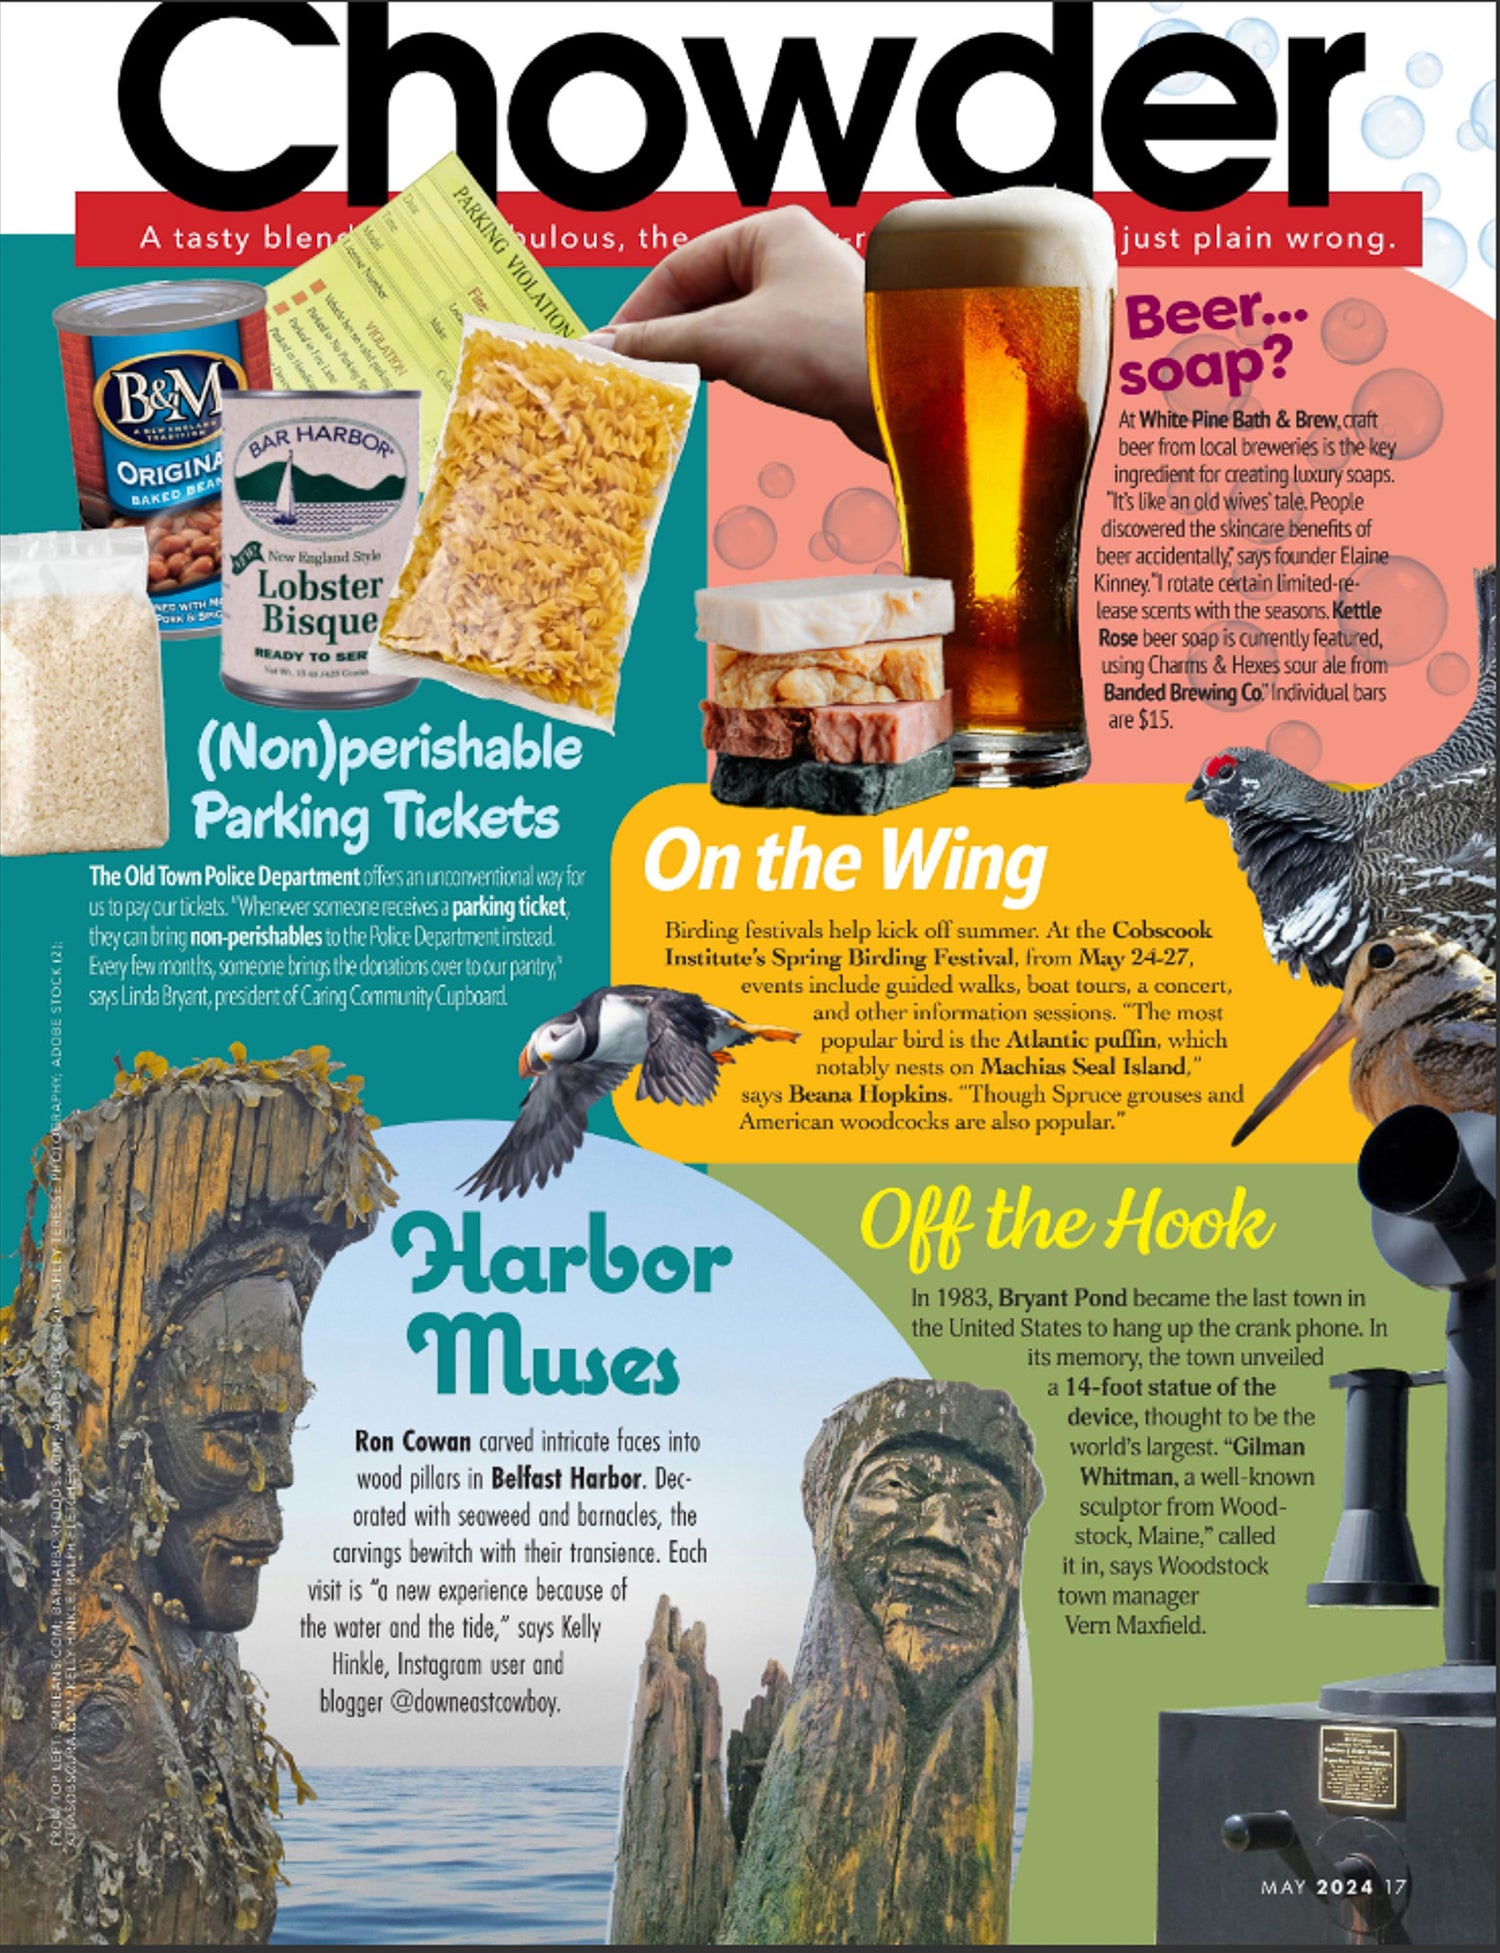 Portland Monthly: Chowder, Beer...soap? white pine bath and brew